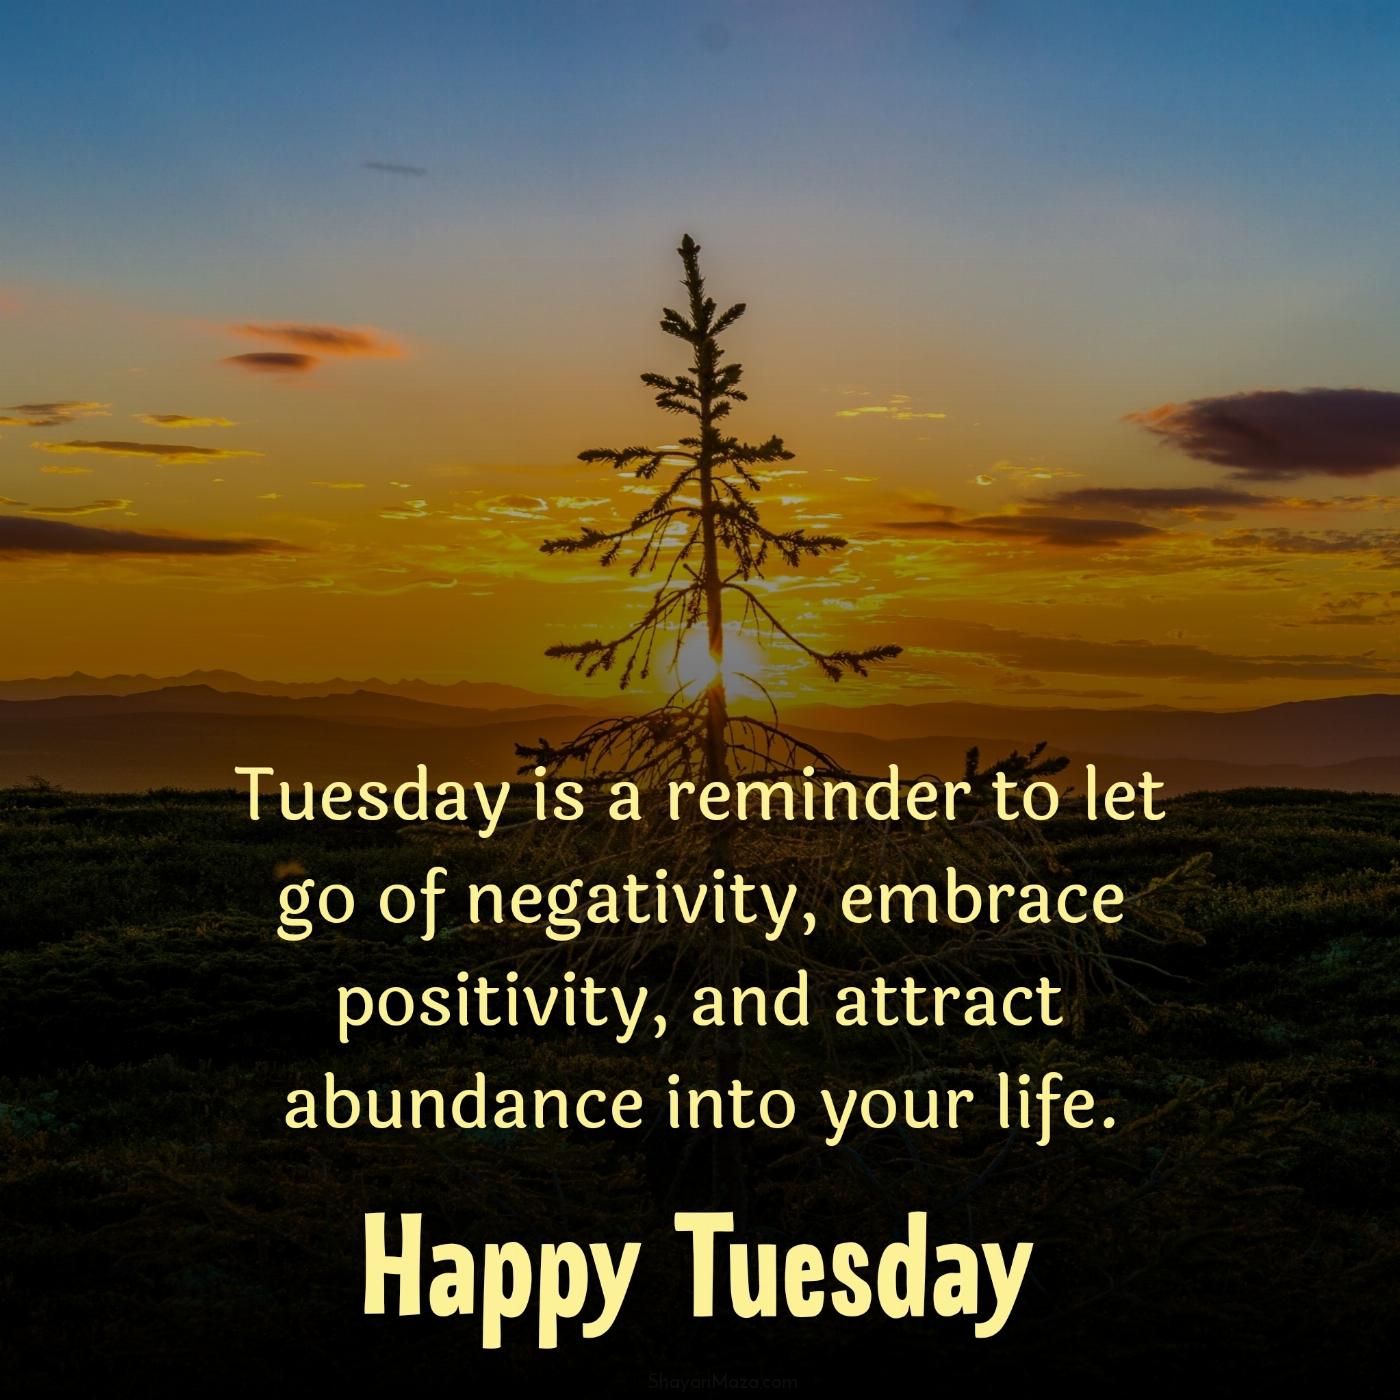 Tuesday is a reminder to let go of negativity embrace positivity